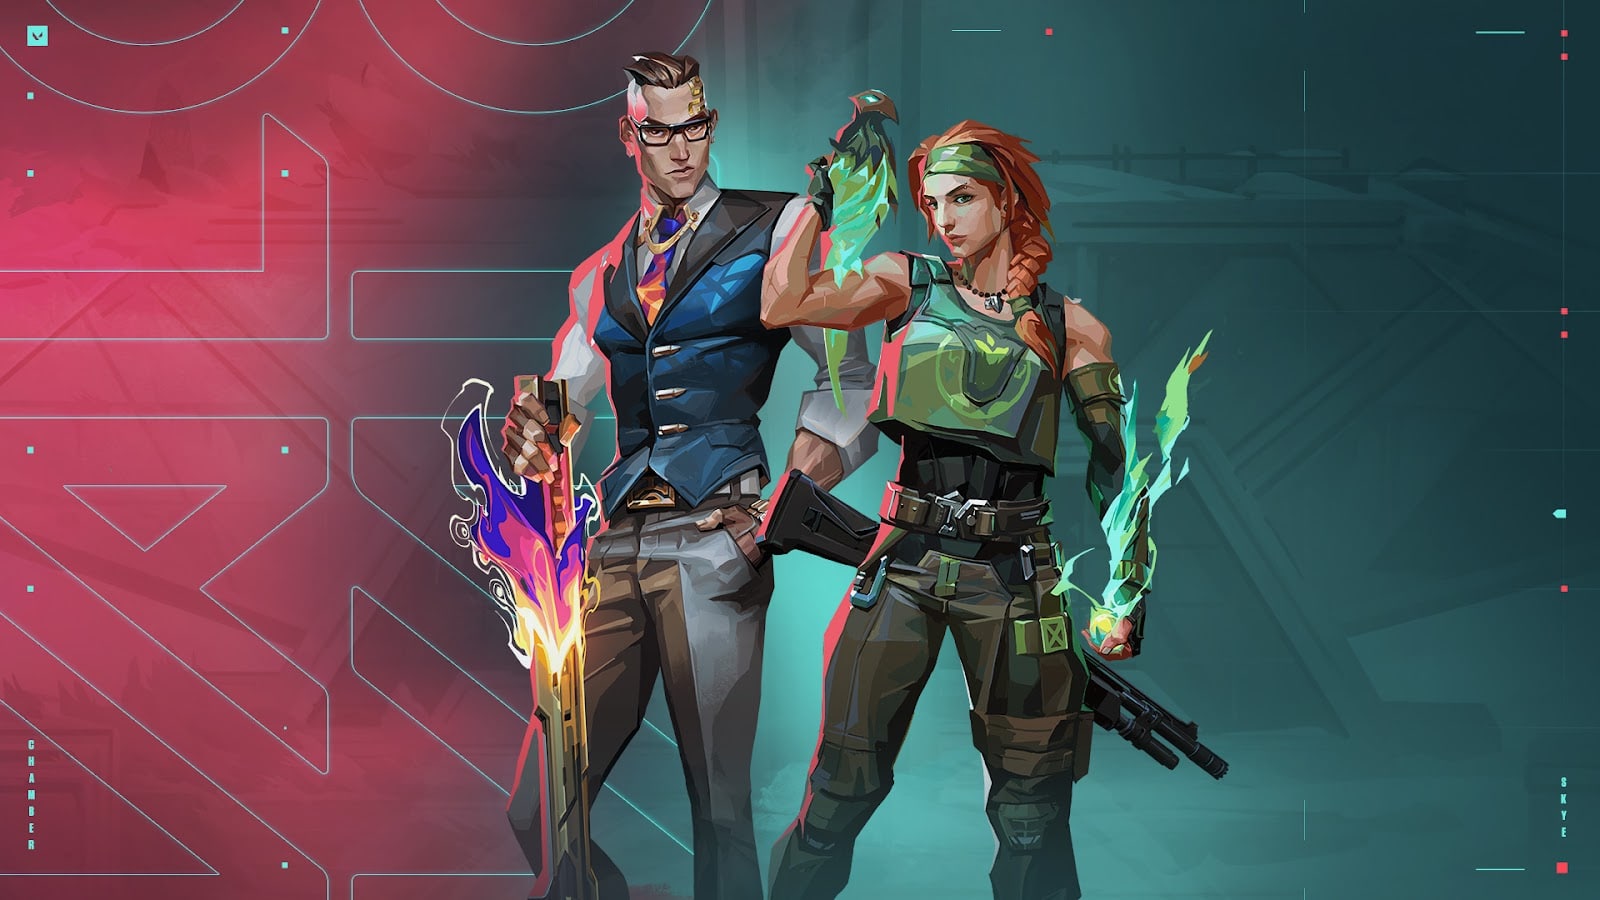 Valorant agents Chamber and Skye stand against a red and green background